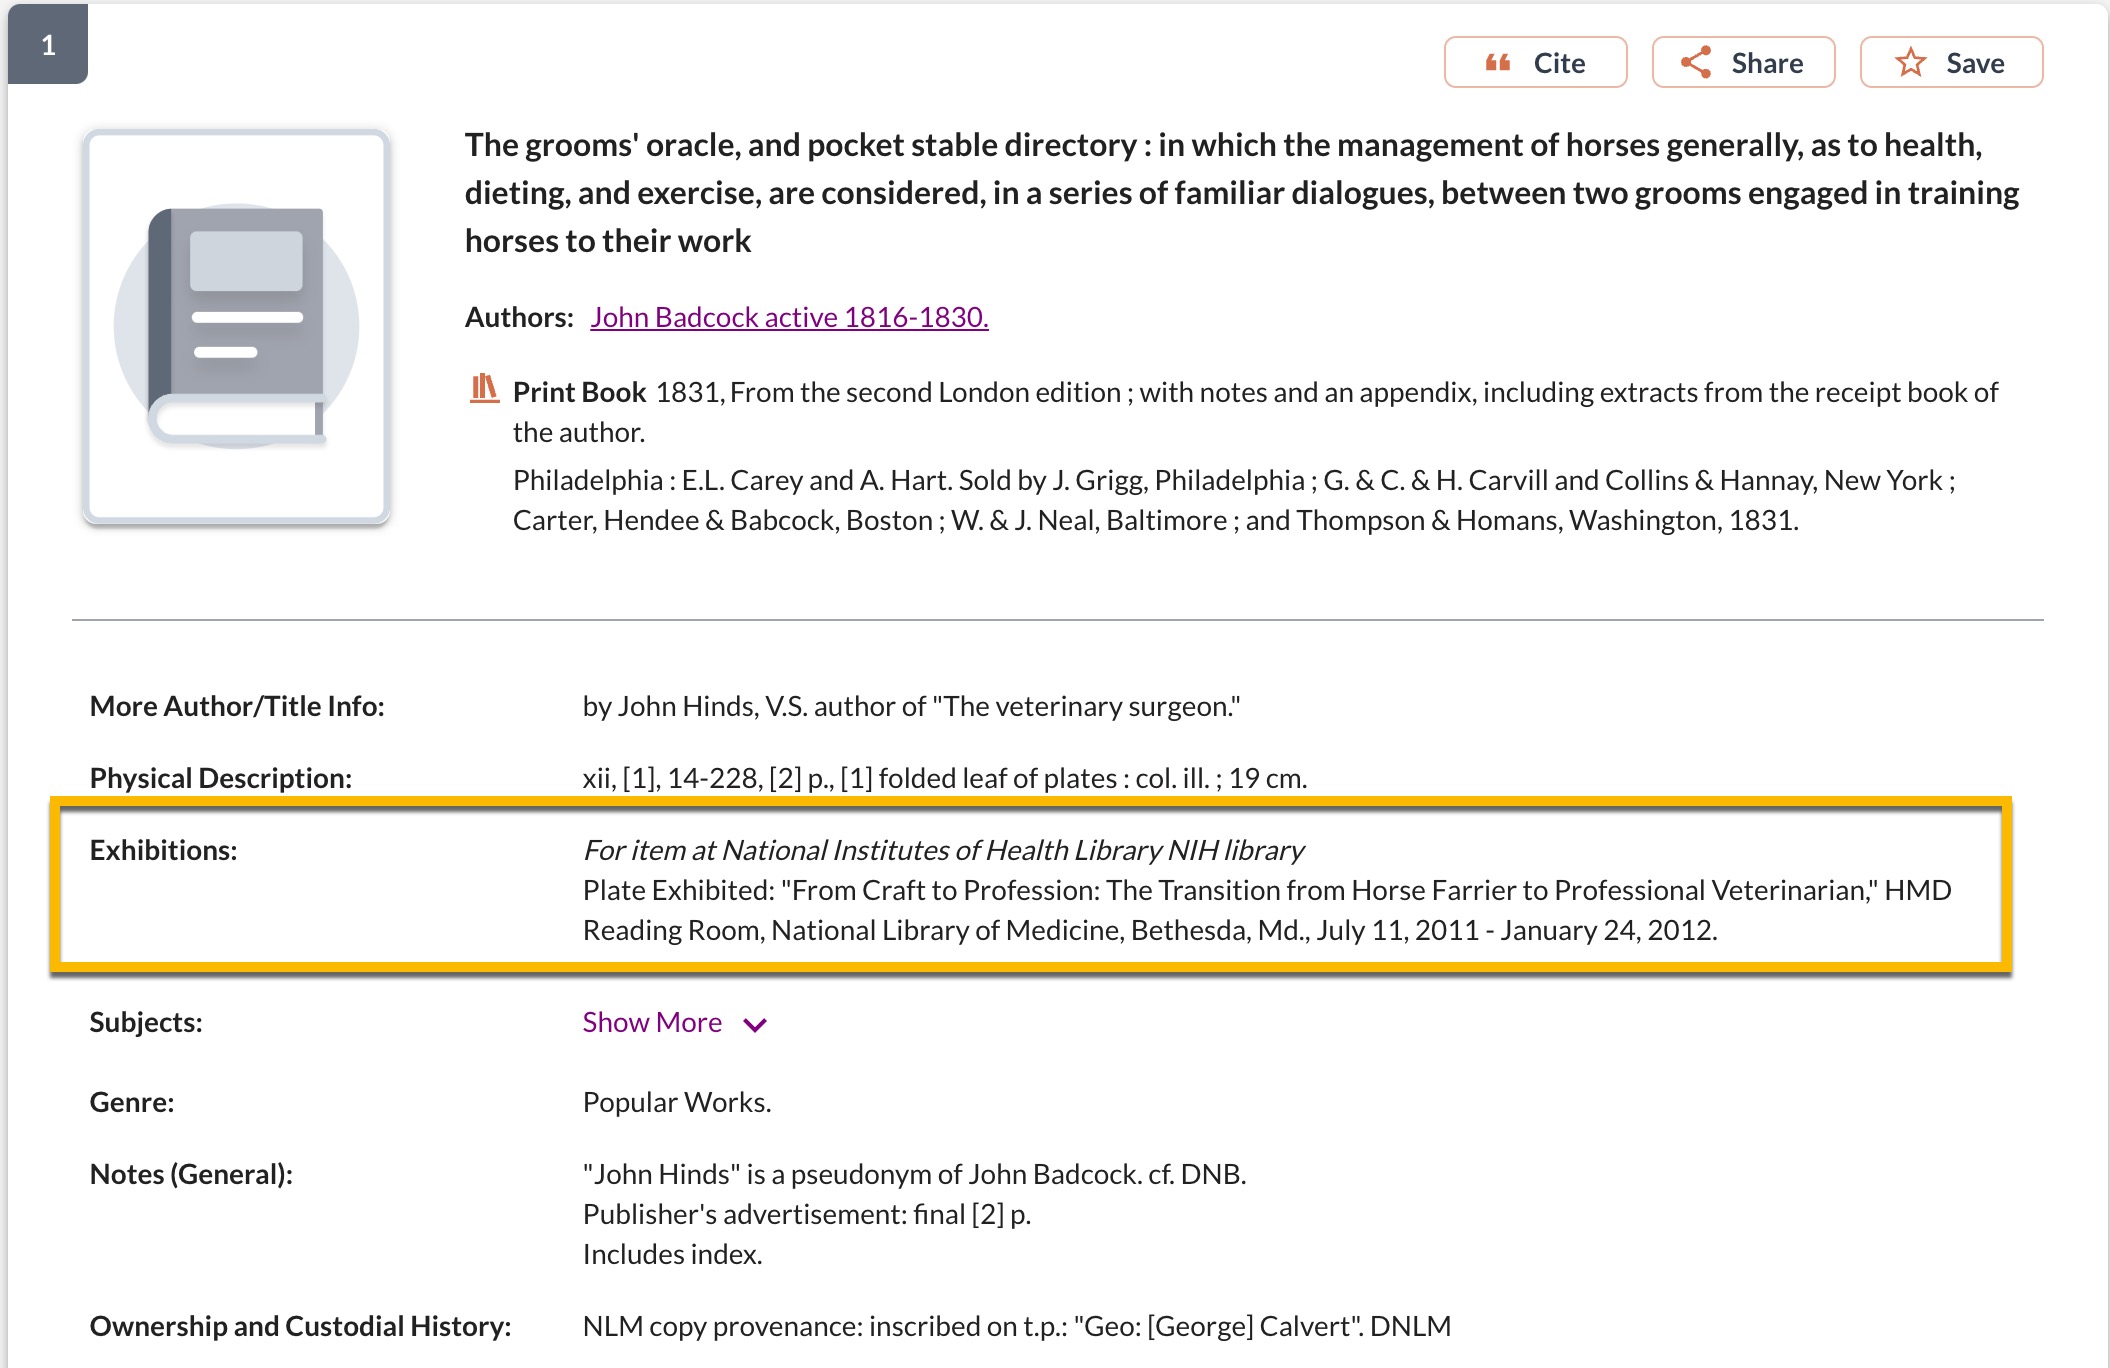 Screenshot showing an item details page with $5 information outlined with a yellow box. The $5 display readsL: "For item at National Institutions of Health NIH Library".